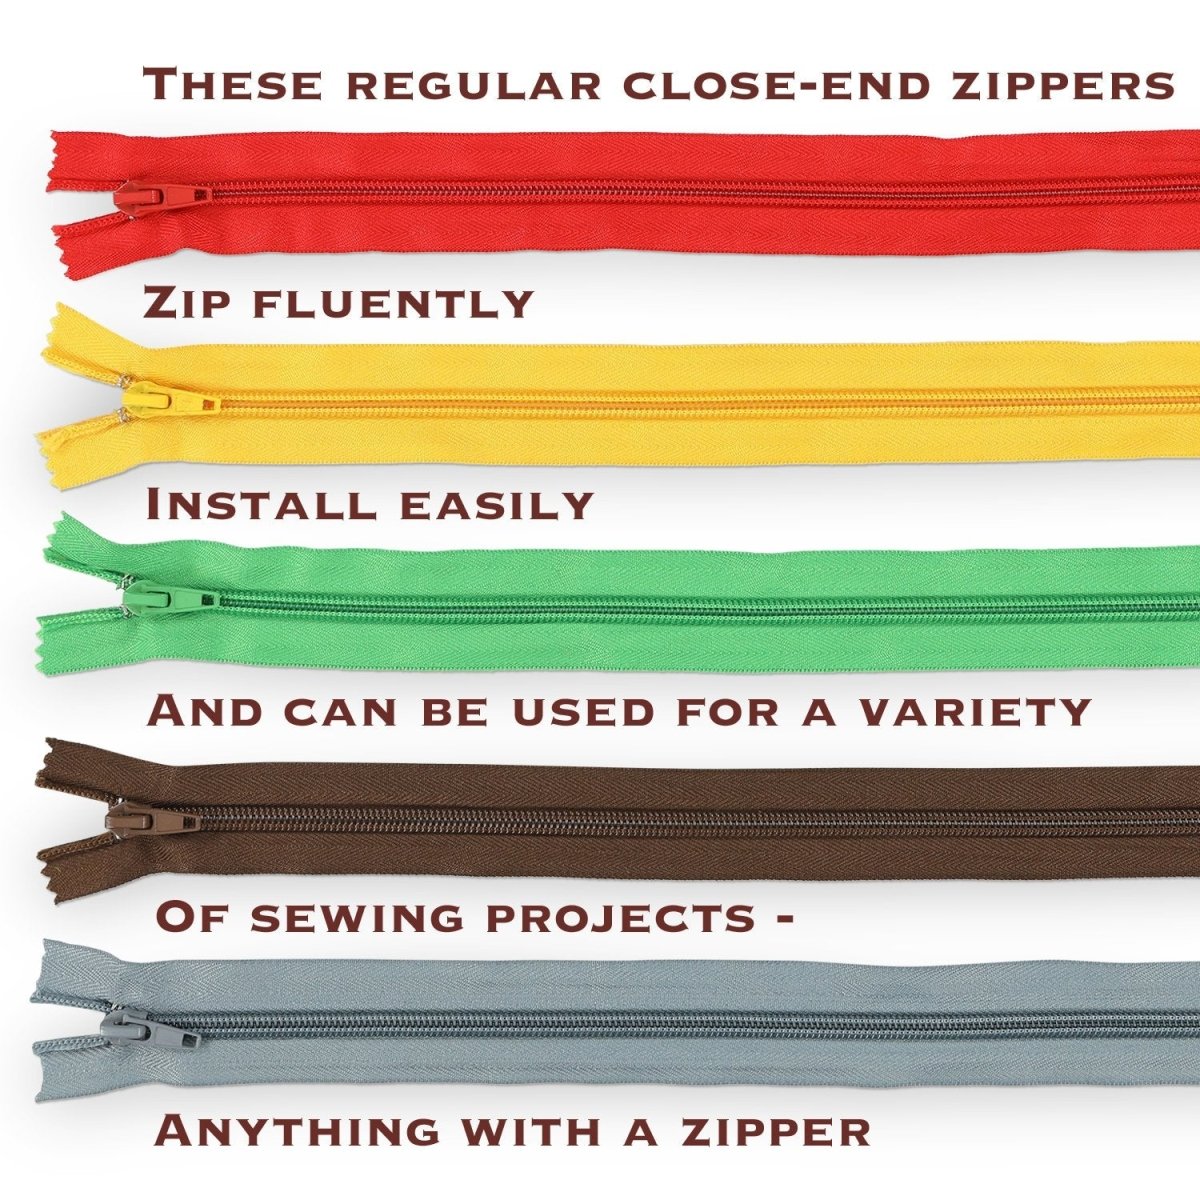 five zippers in different colors with some features of the zippers